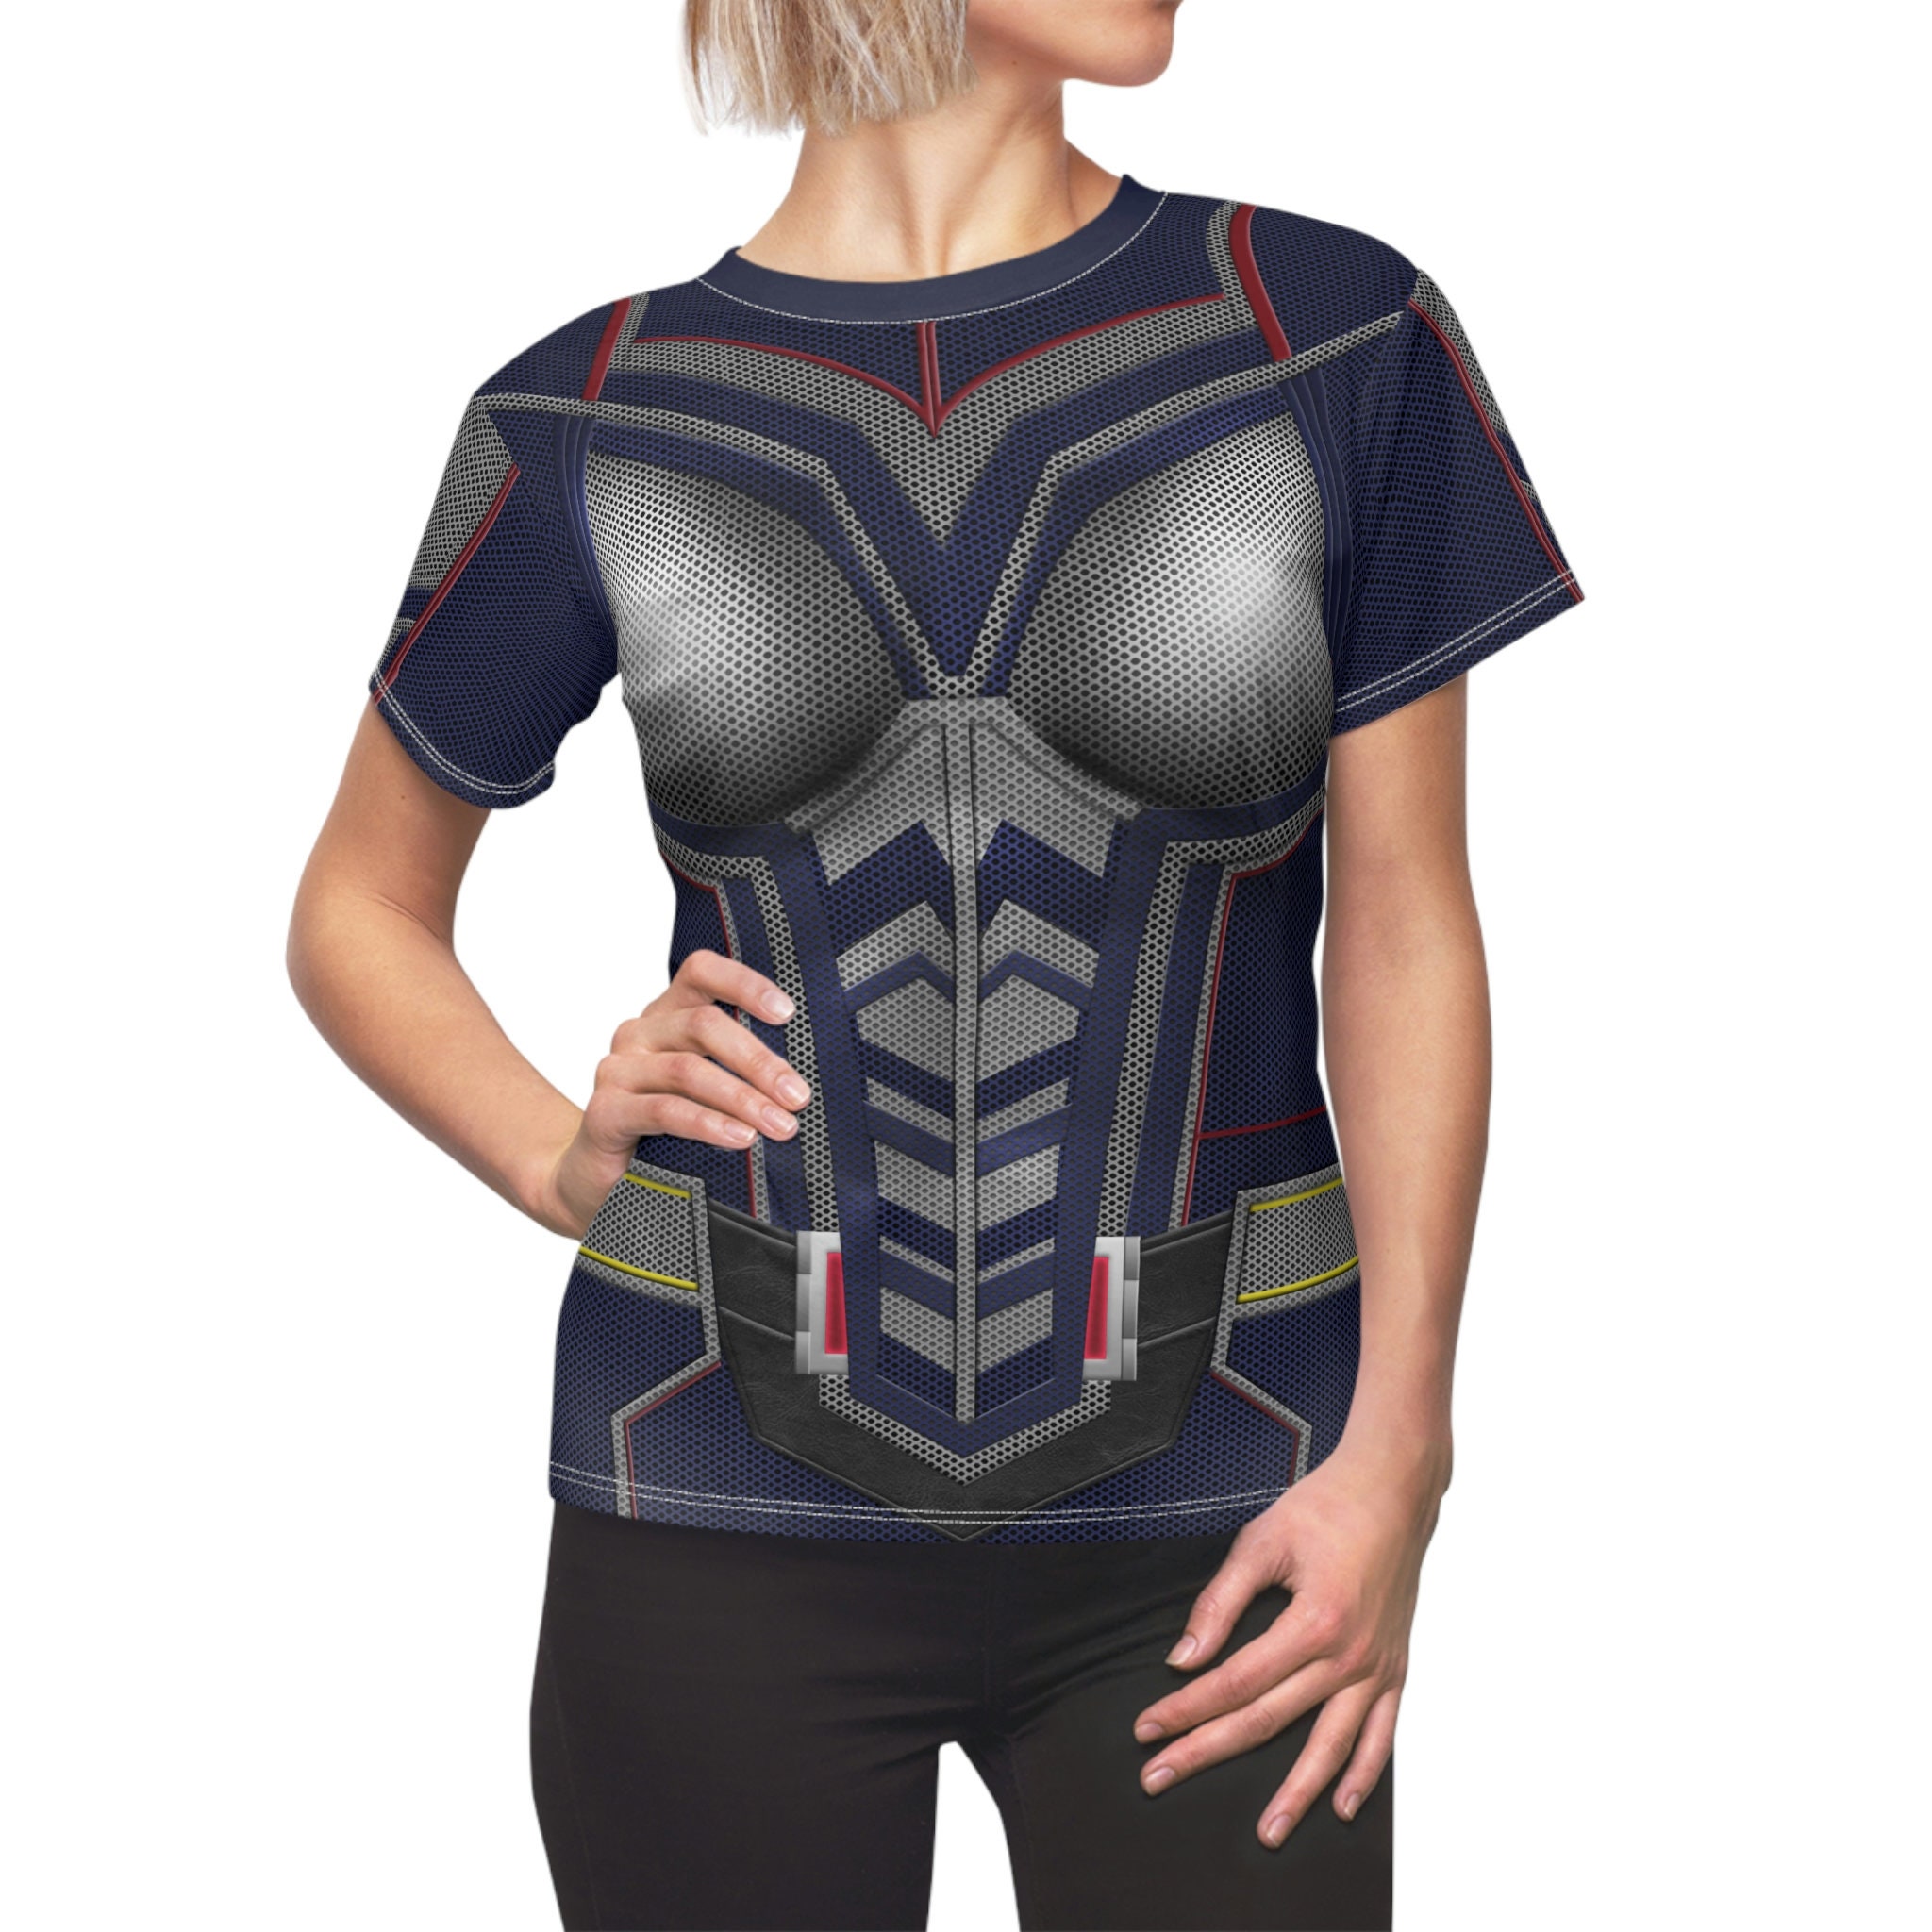 Discover The Wasp Women's T-Shirt, Ant-Man Movie Costume, Hope Van Dyne Cosplay 3D Shirt